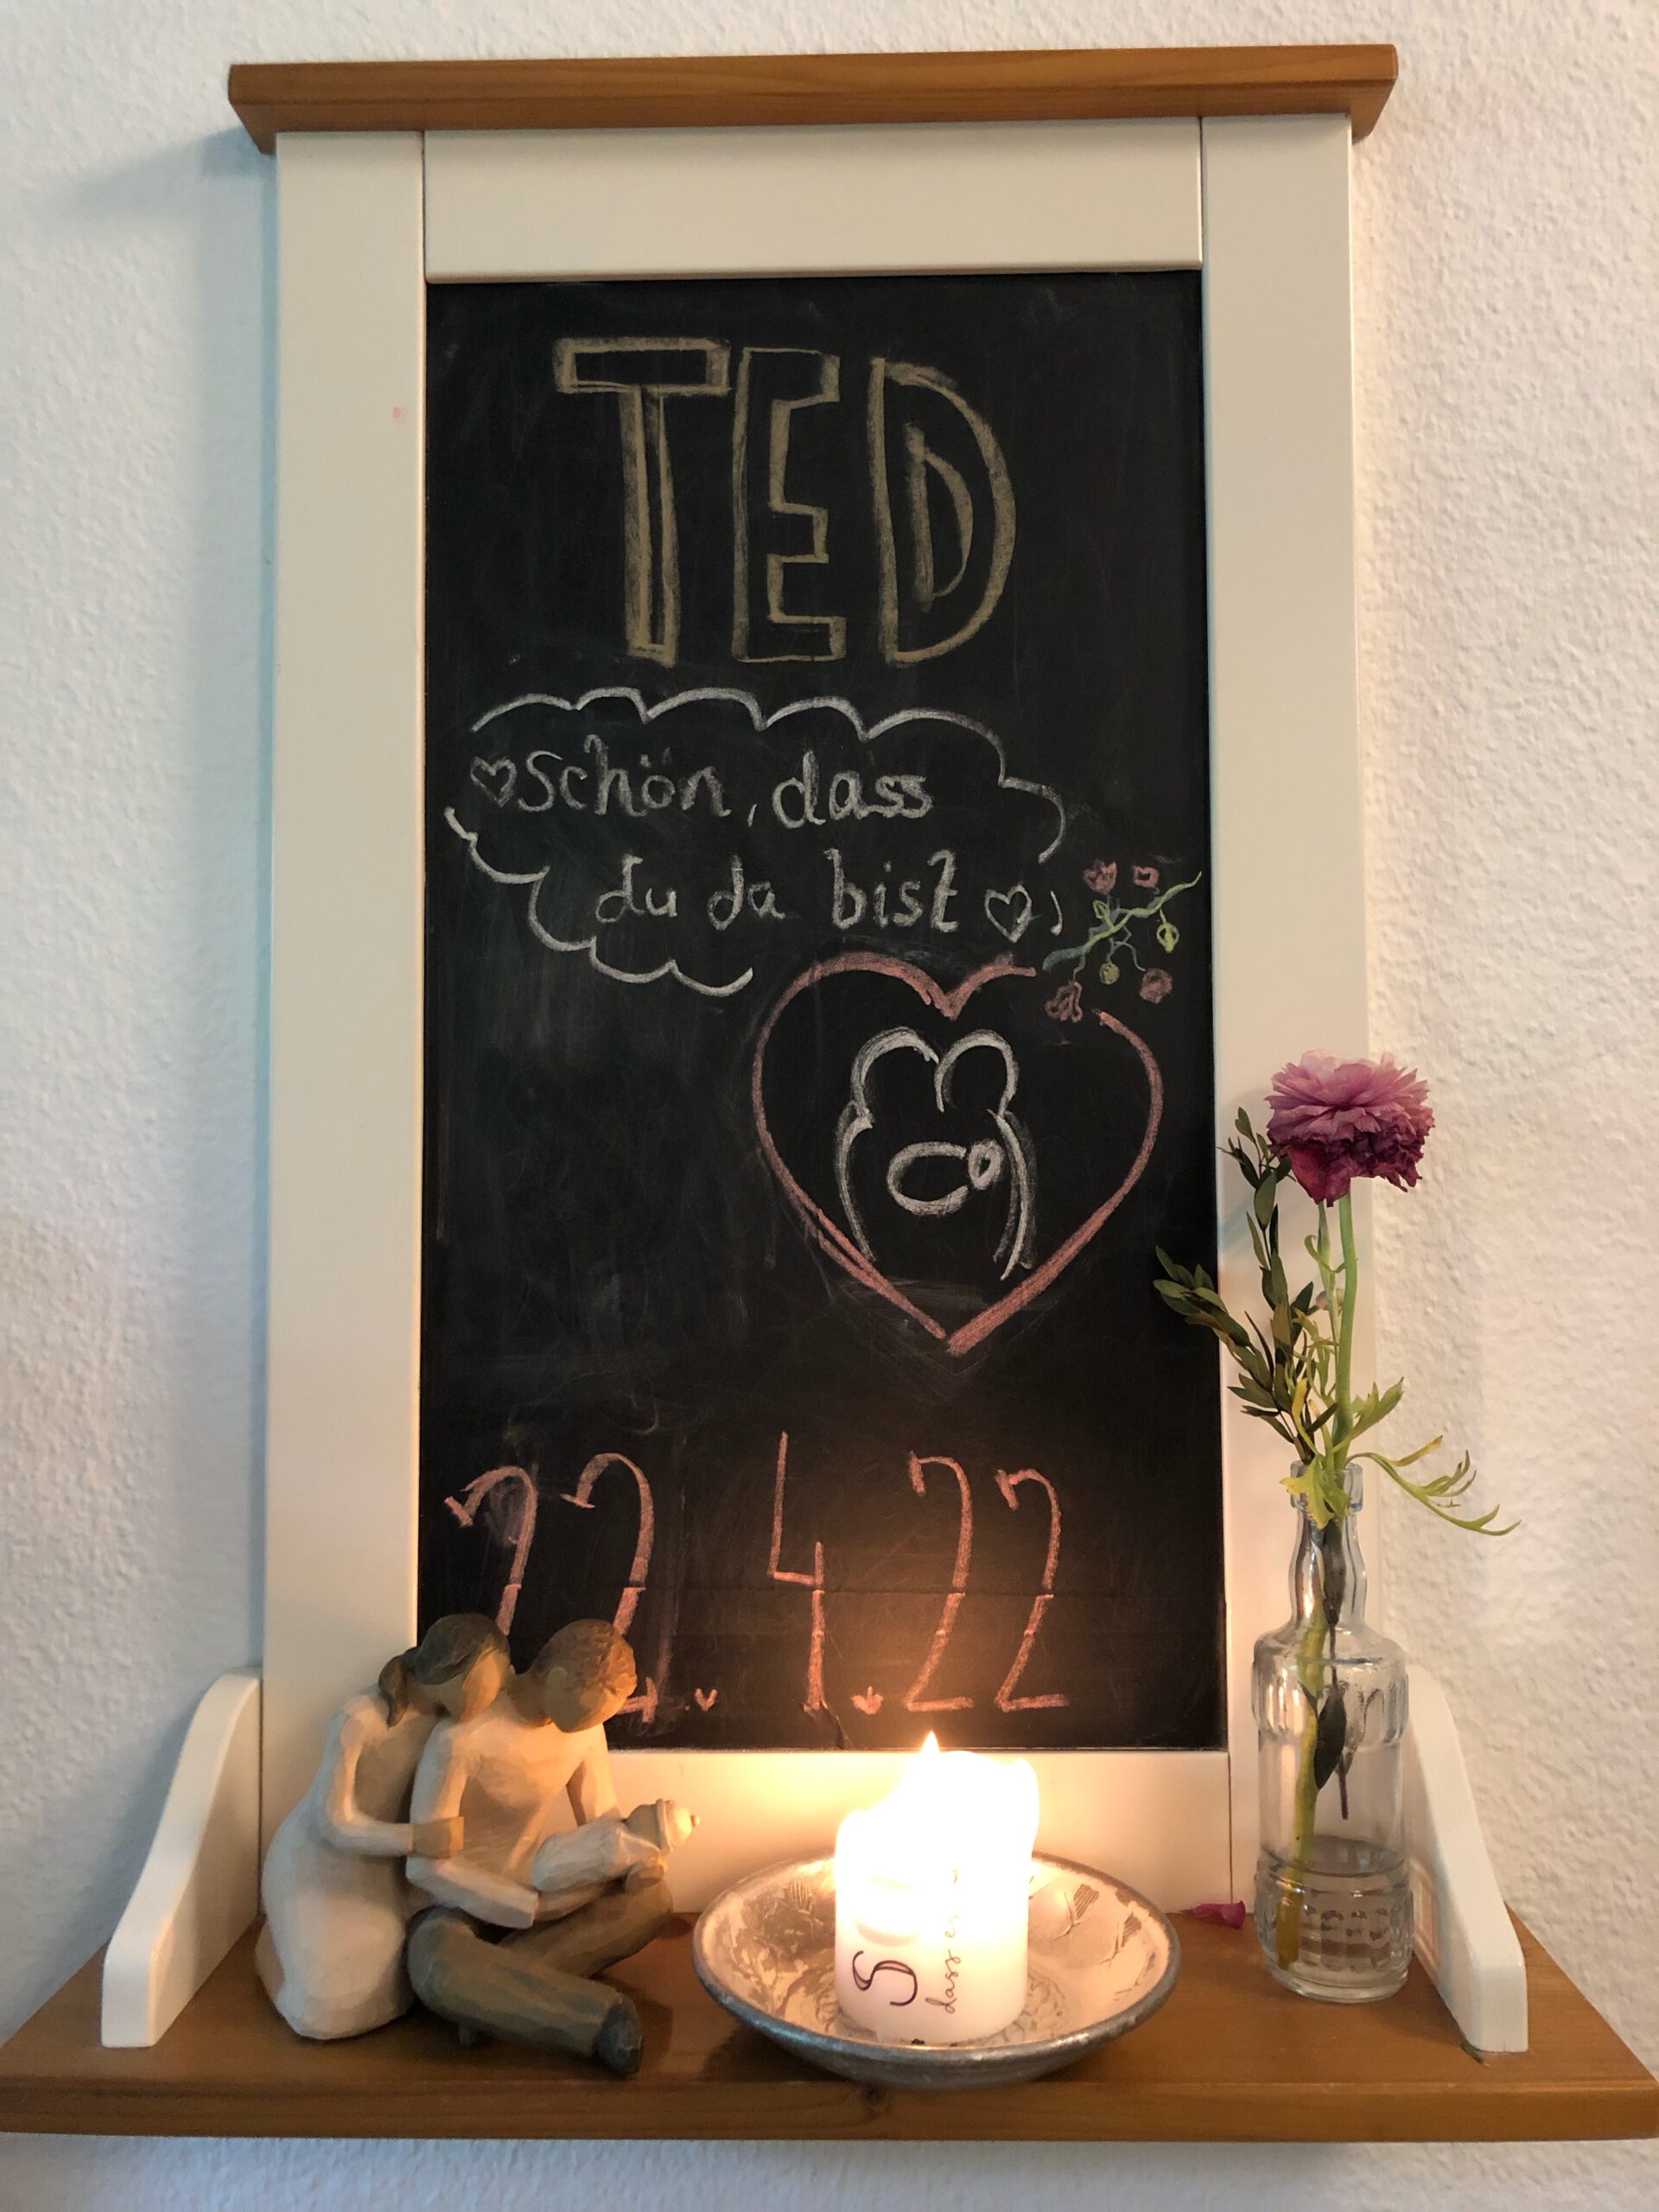 22.04.22 Ted